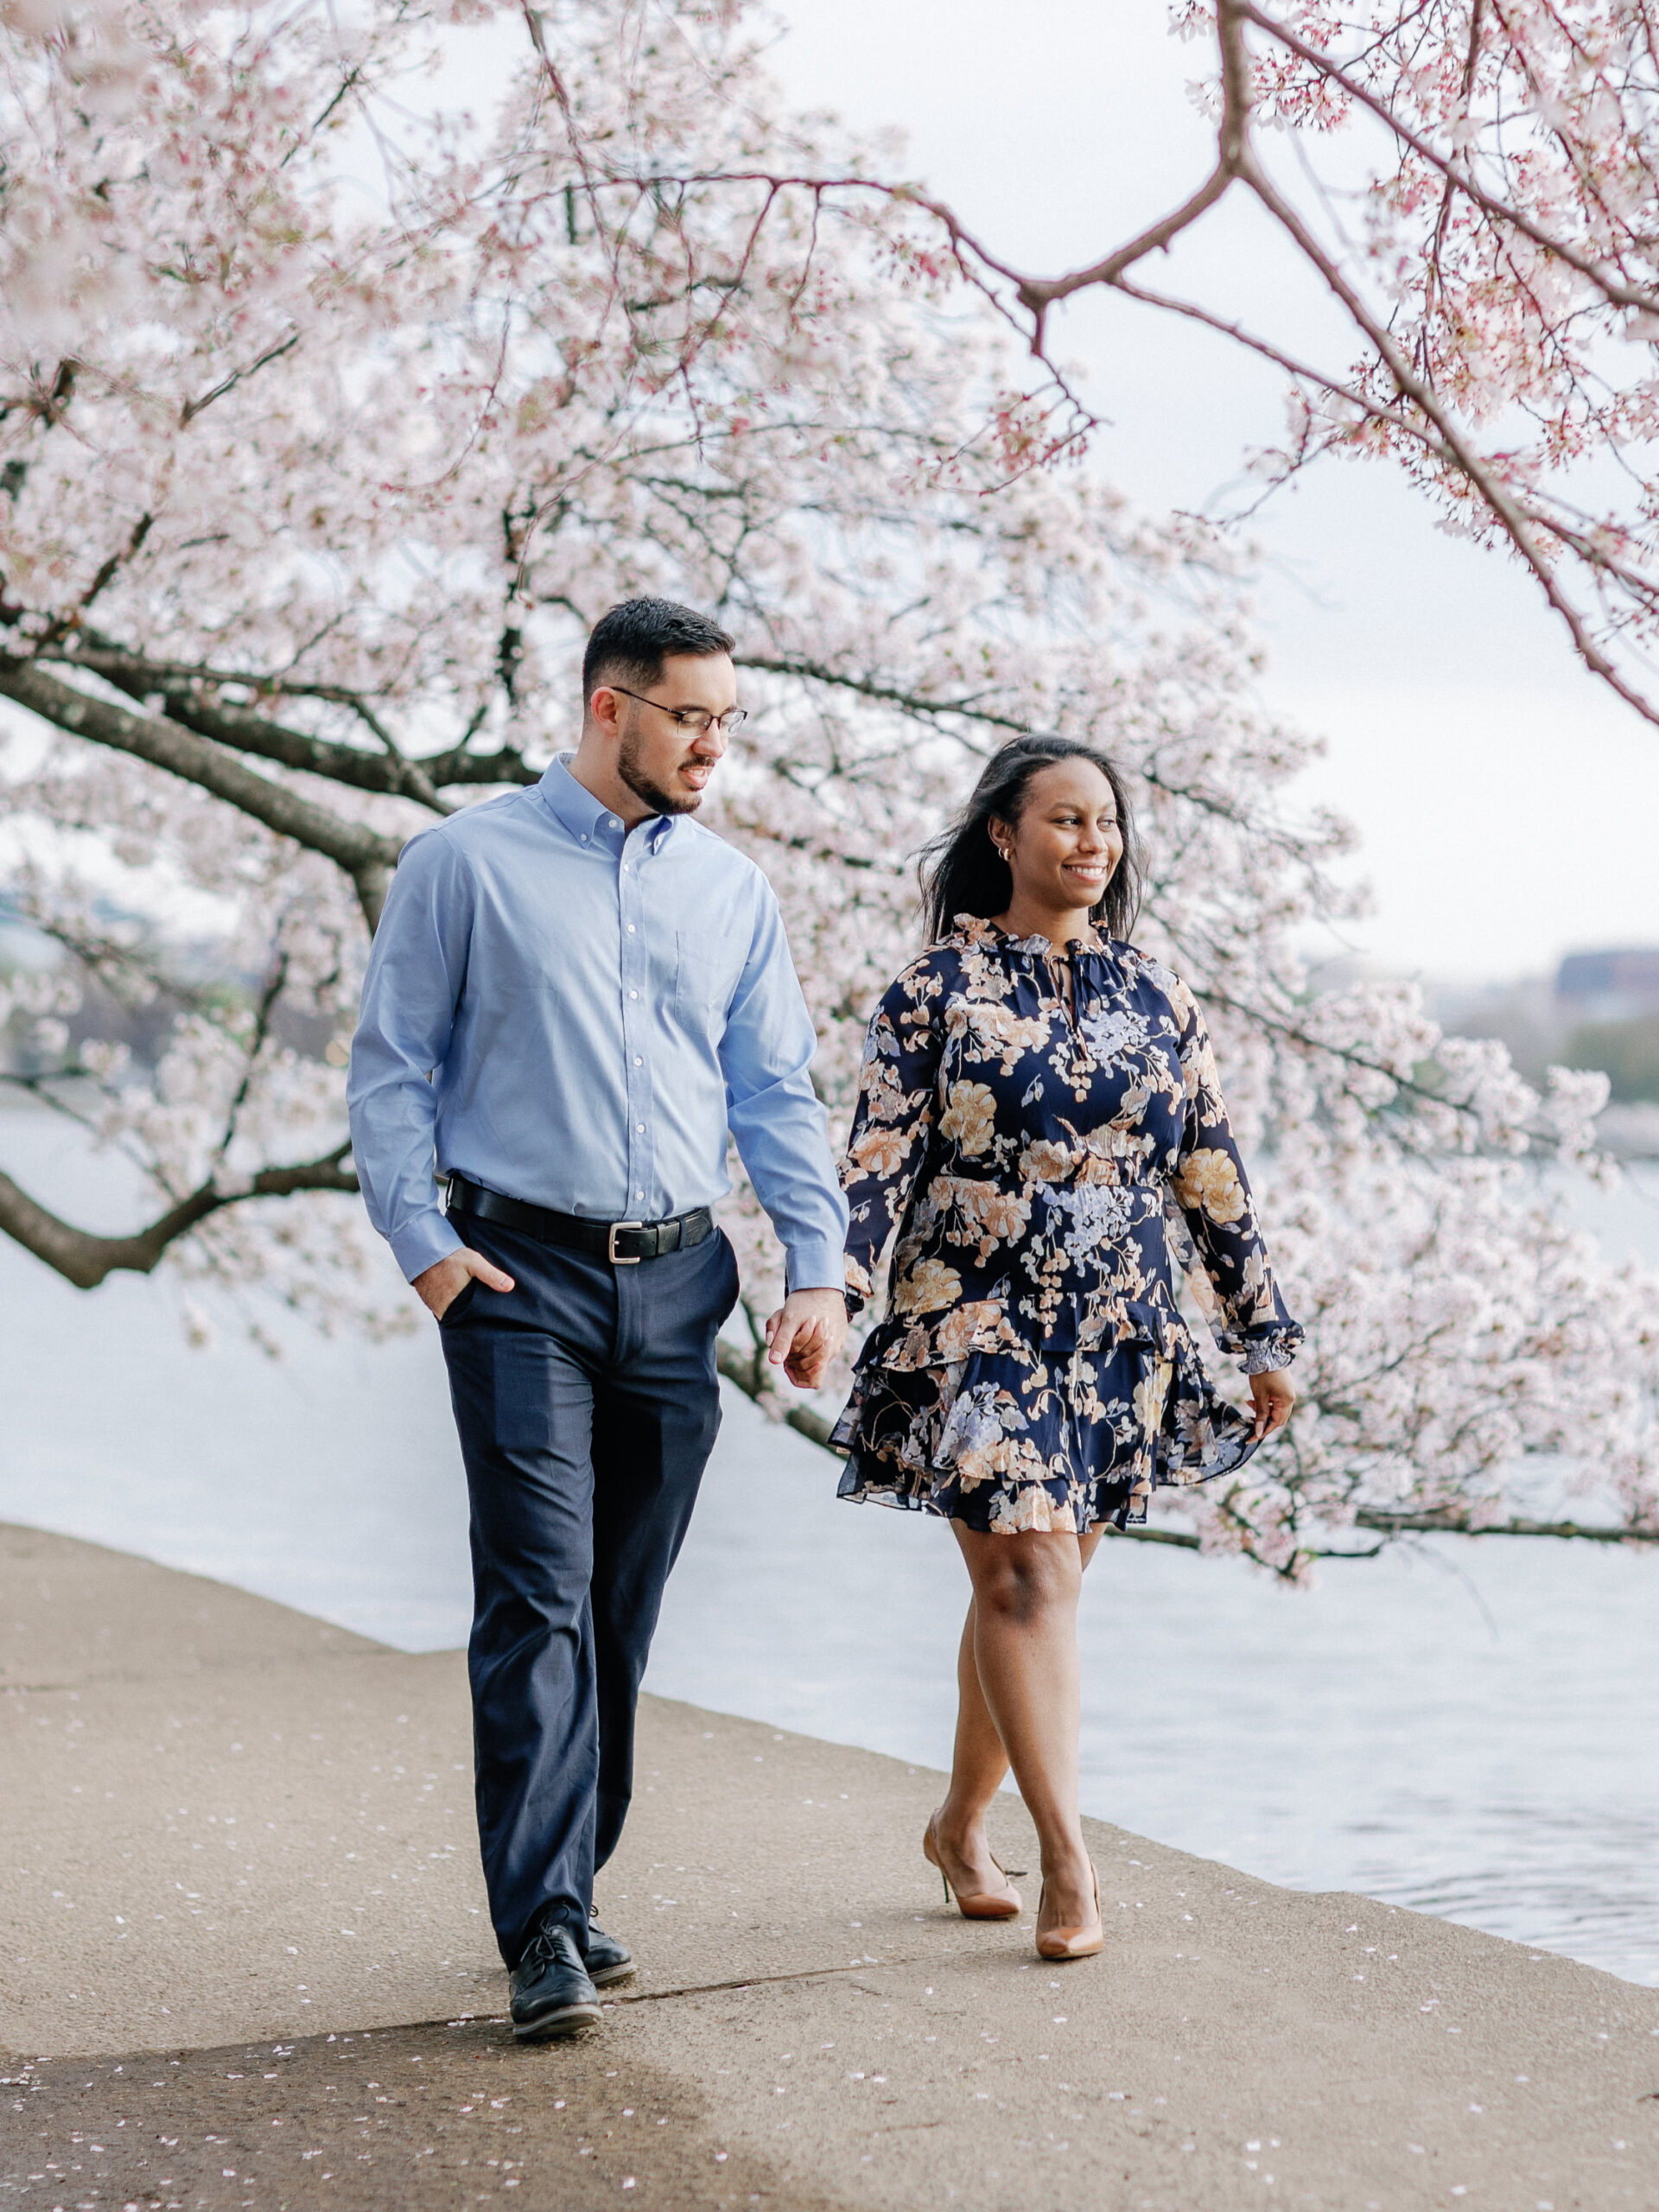 An newly engaged couple walking under the DC cherry blossom trees at the Tidal Basin.